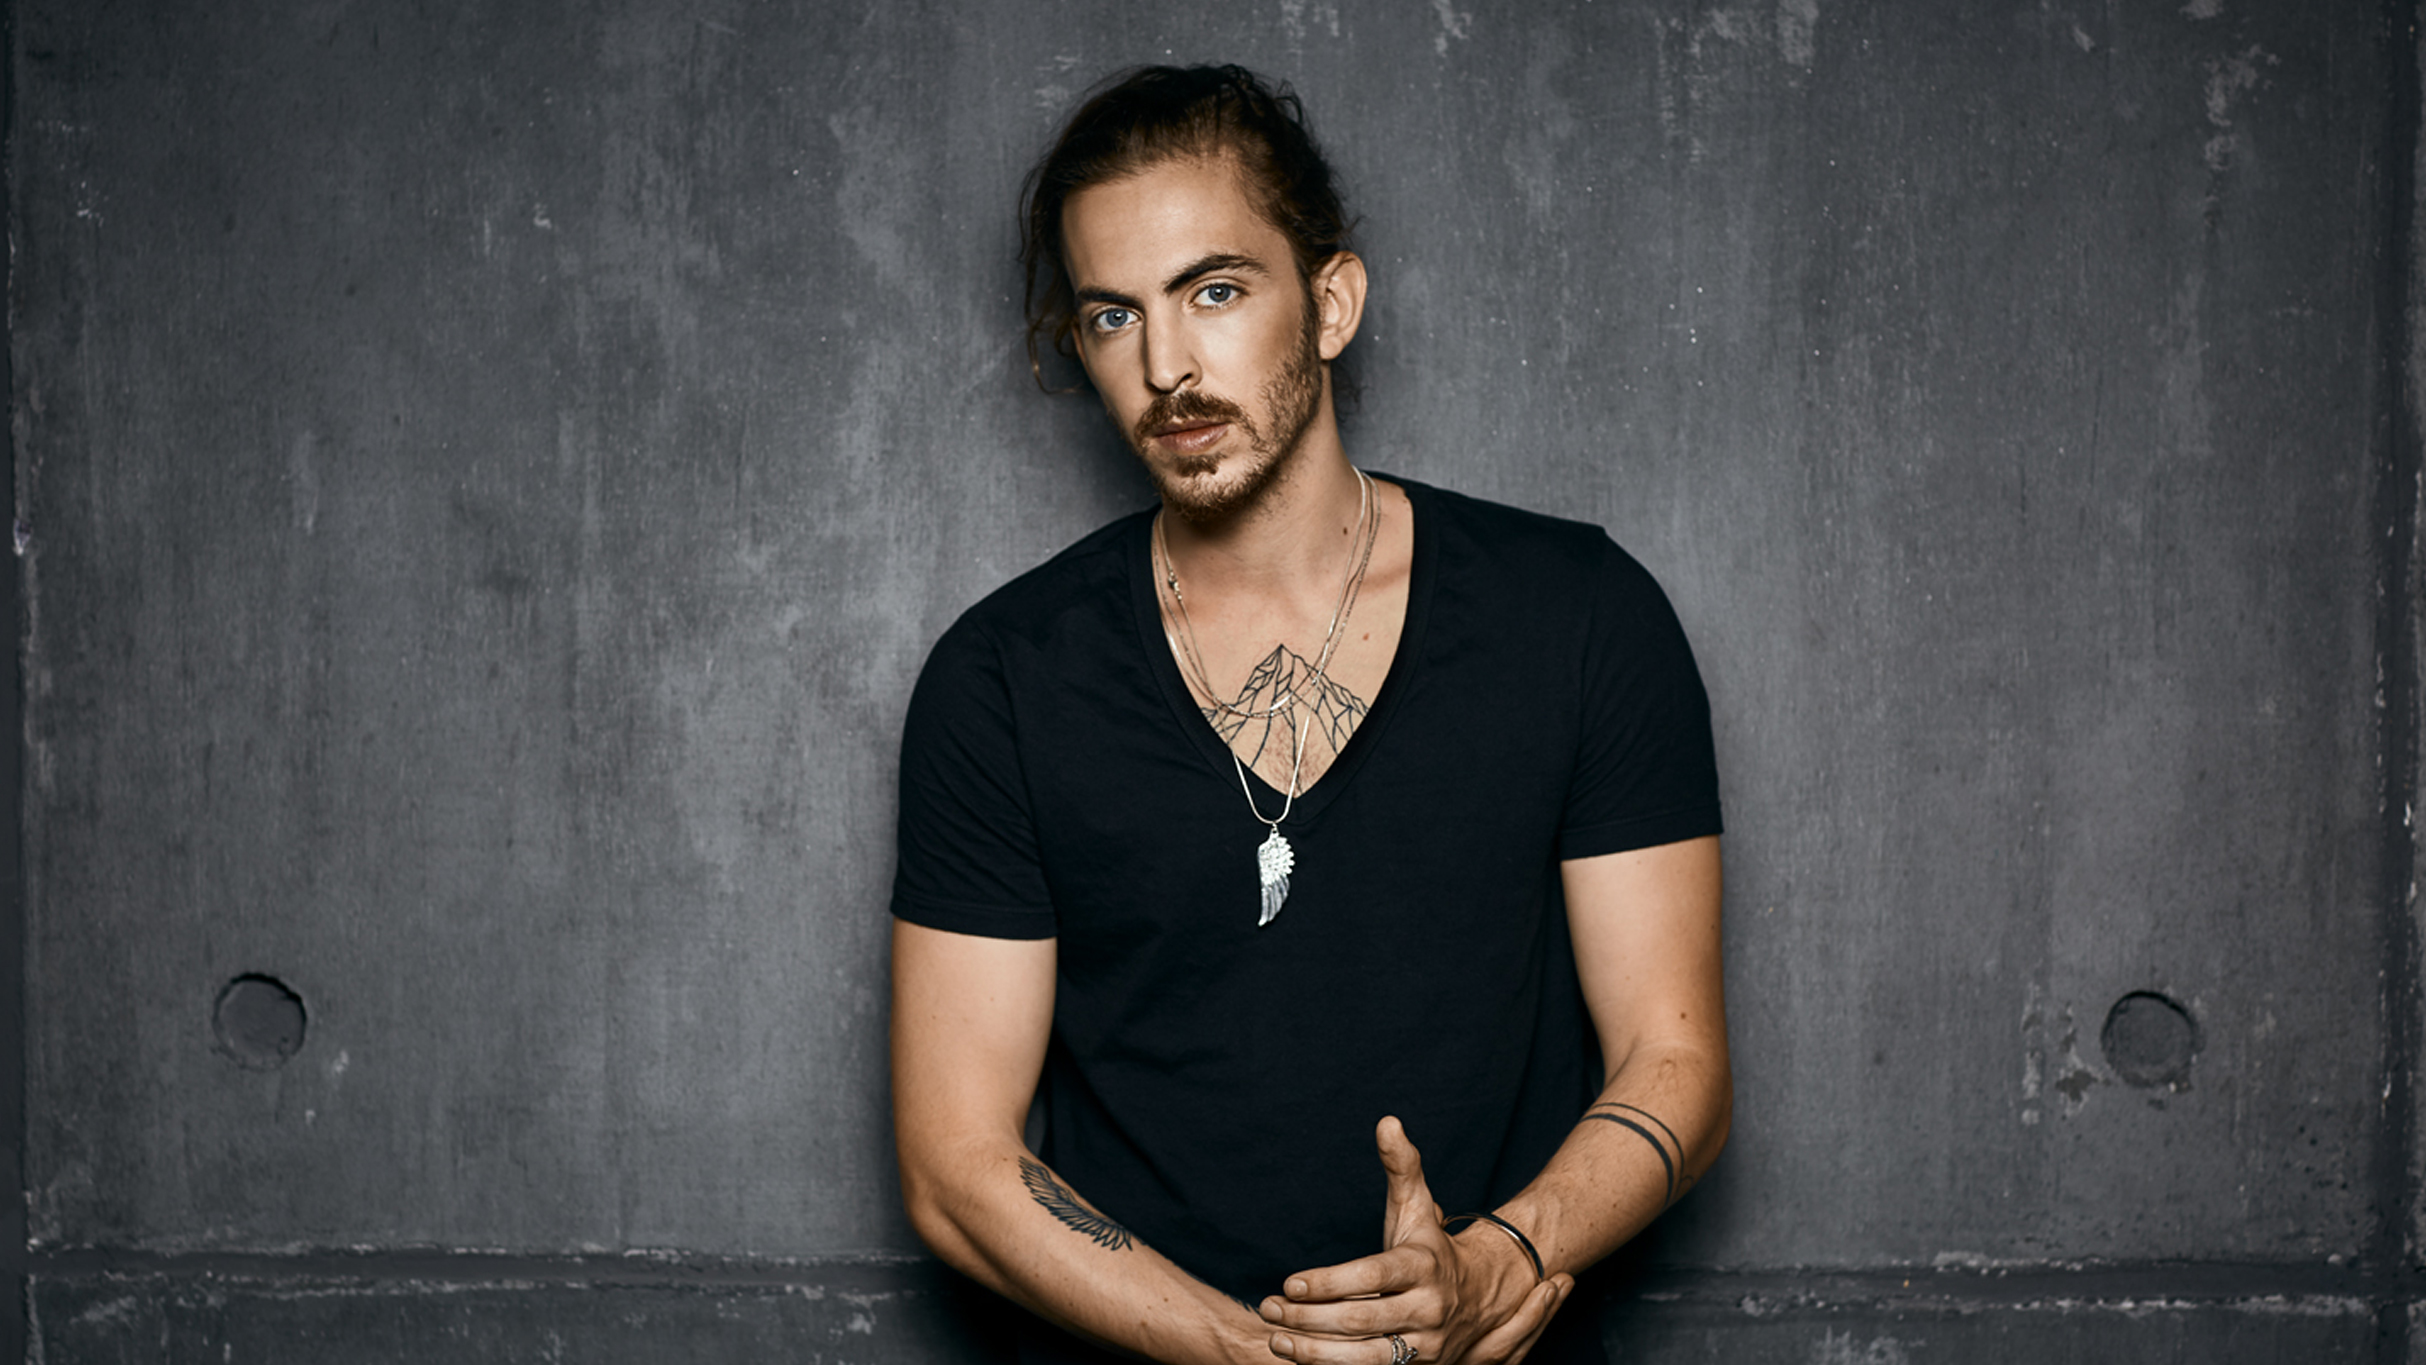 Governors Ball Presents Dennis Lloyd - The Never Go Back Tour in New York promo photo for Live Nation presale offer code